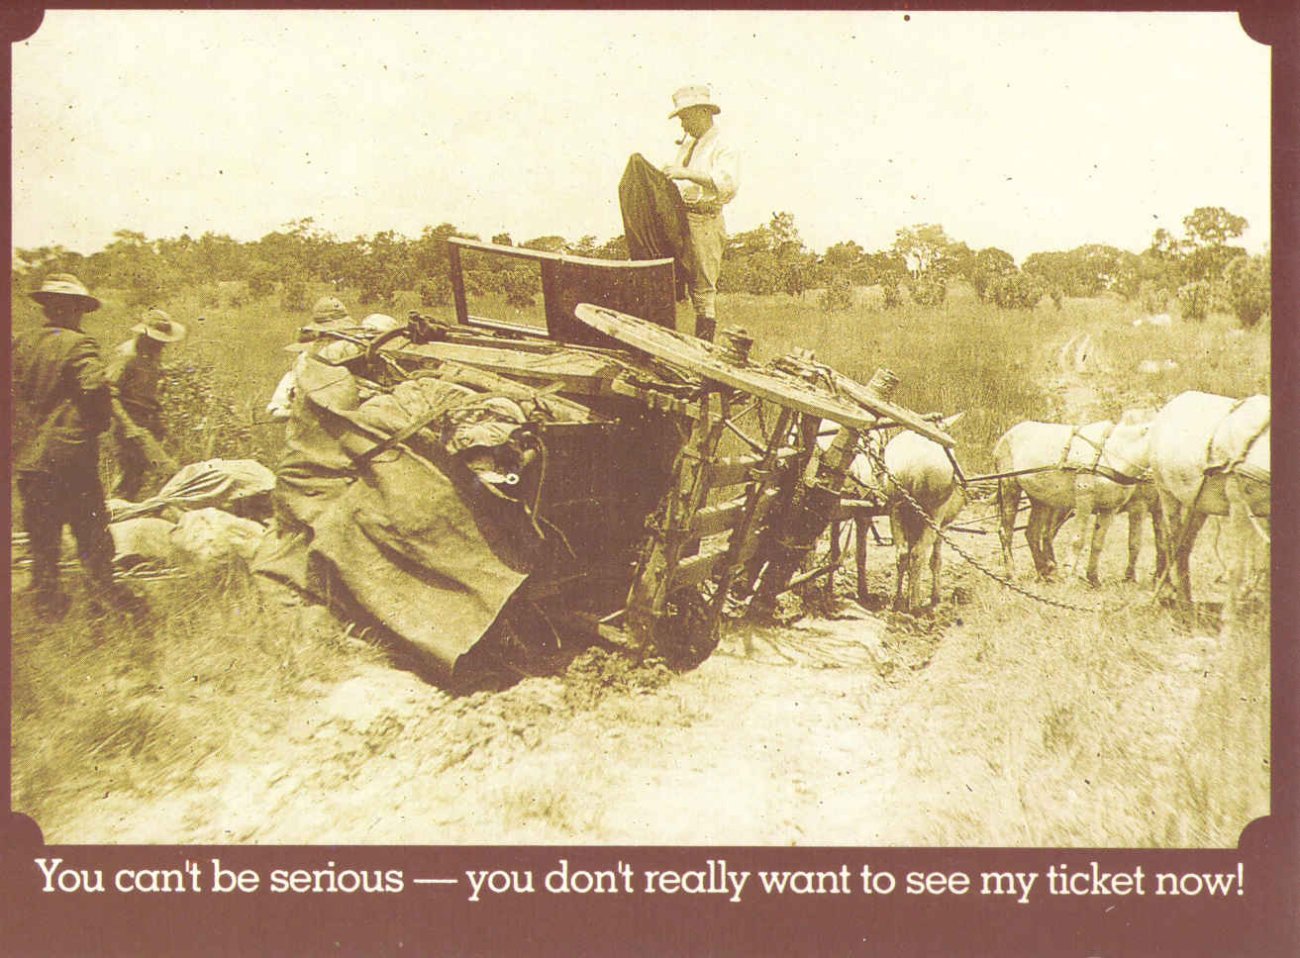 You can't be serious - you really want to see my ticket now!